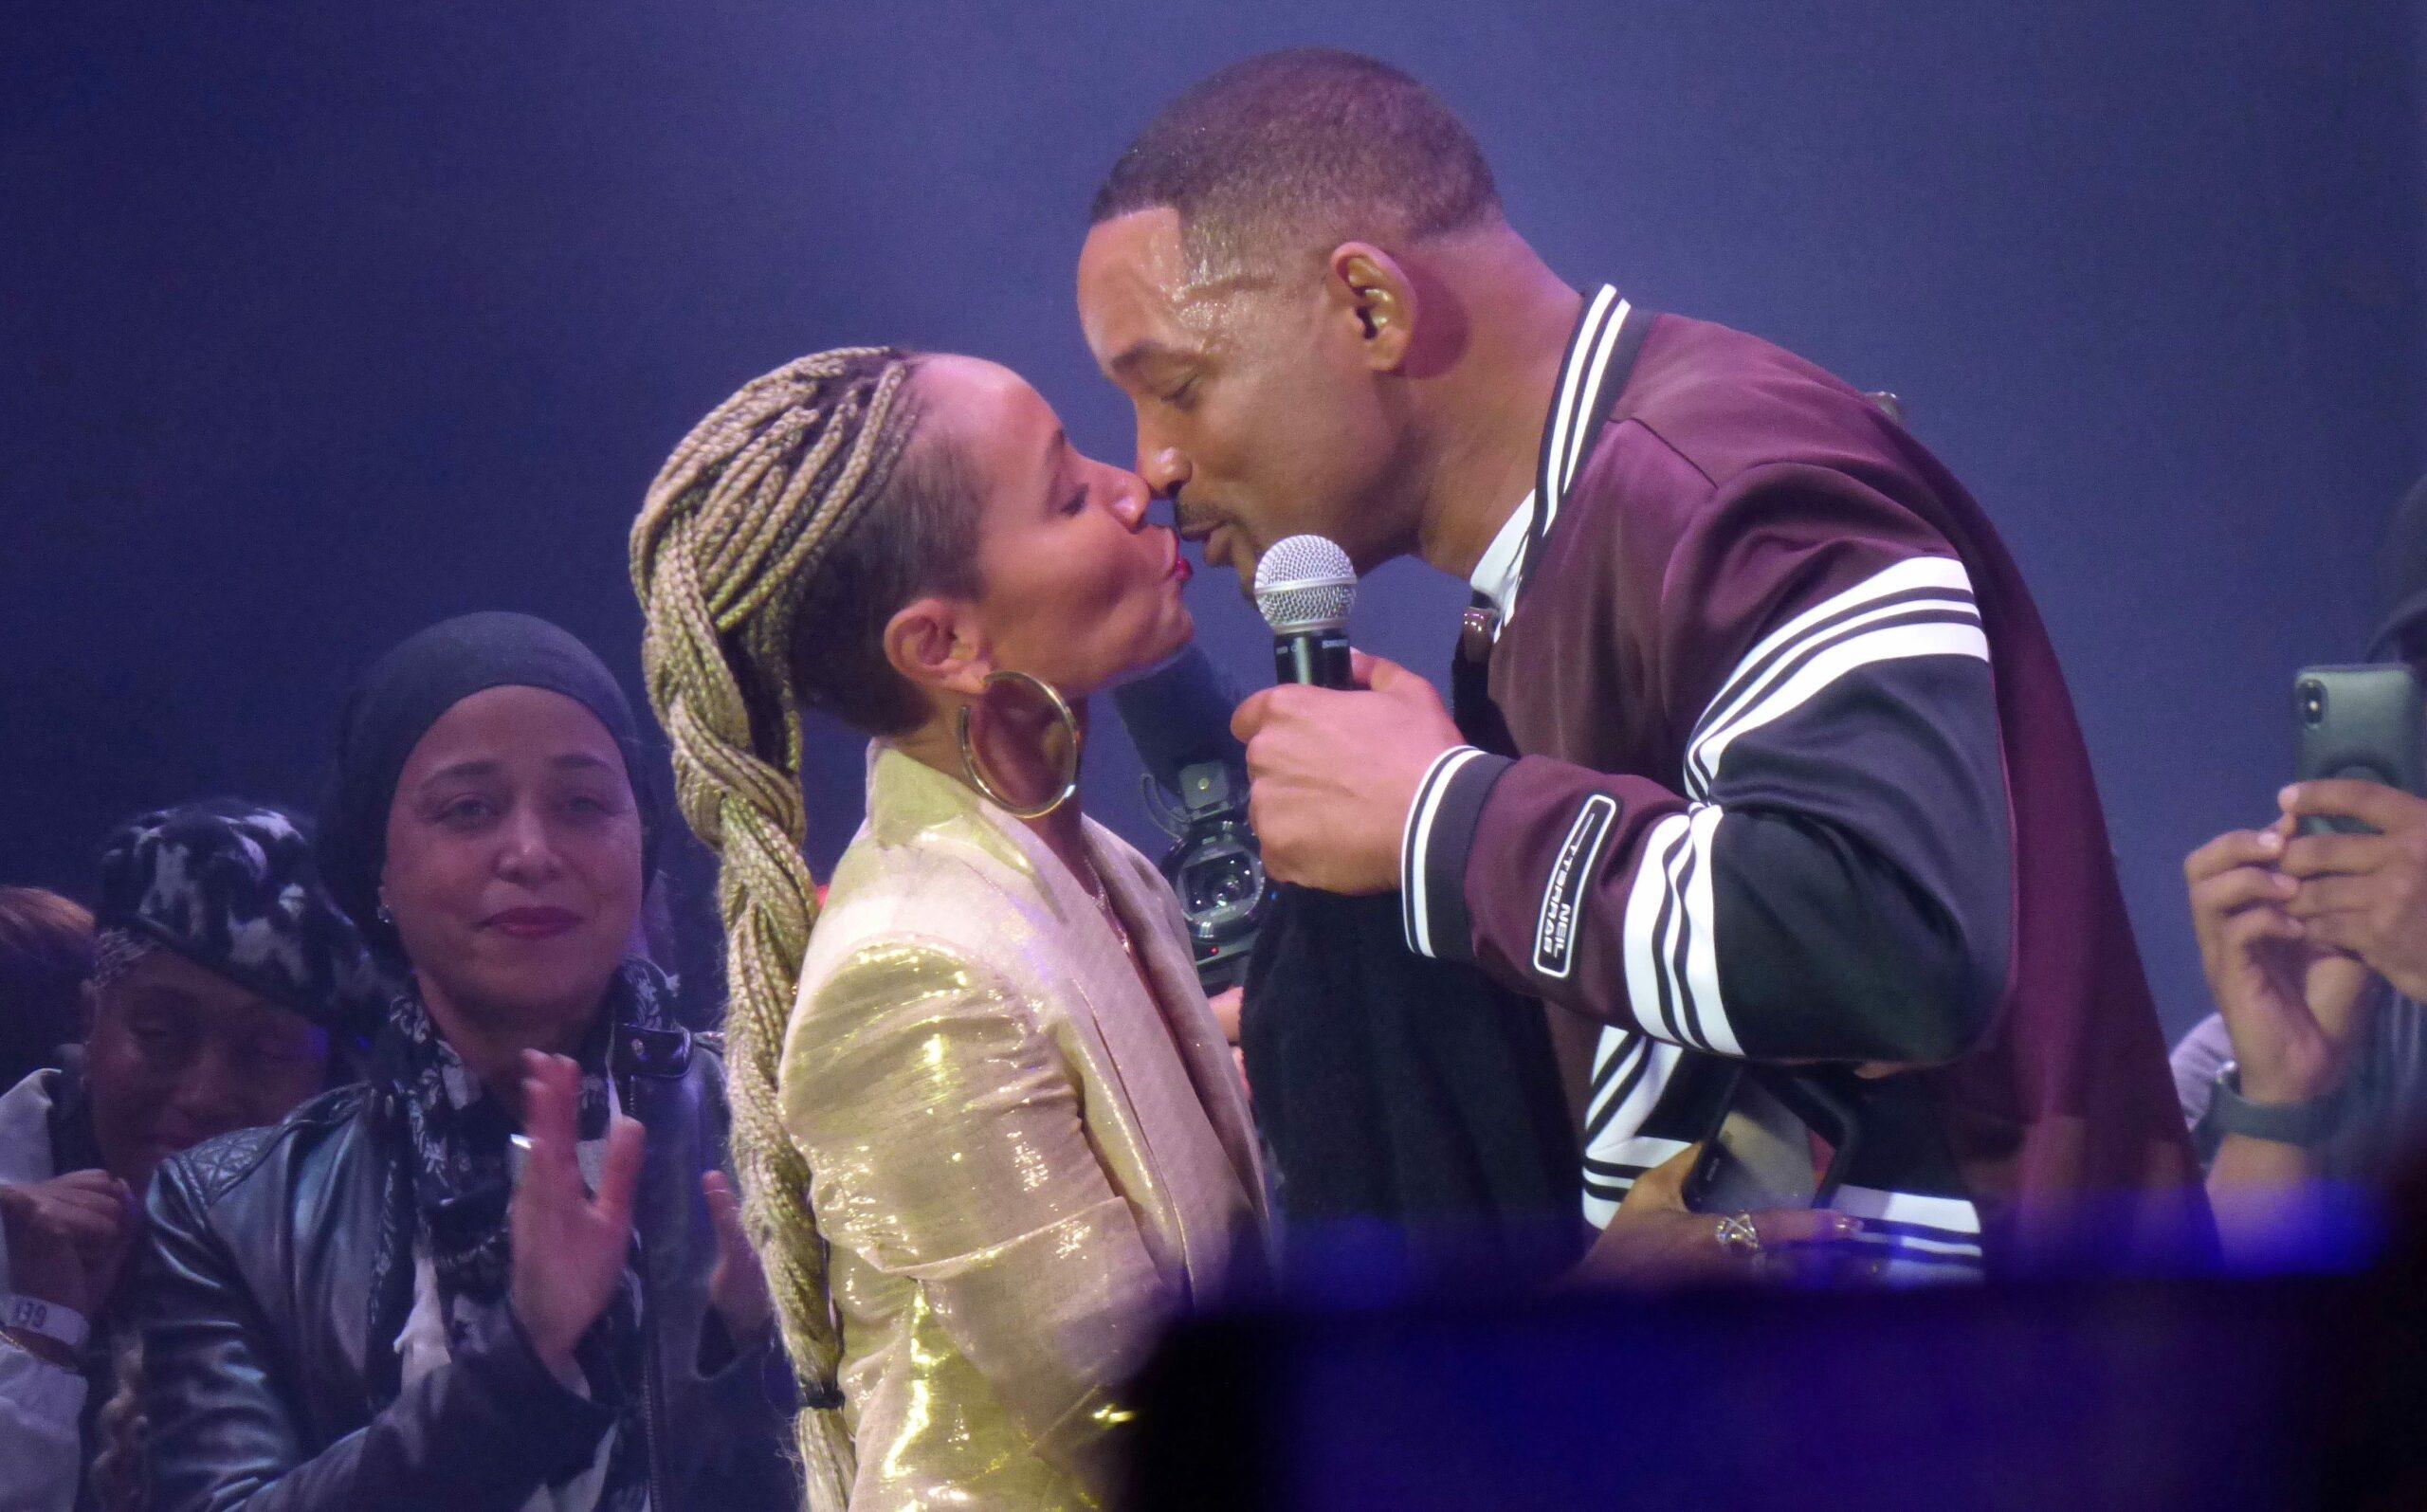 Will Smith is joined on stage by wife Jada and old friend DJ Jazzy Jeff who wished Will happy birthday Will had performed in concert in Budapest